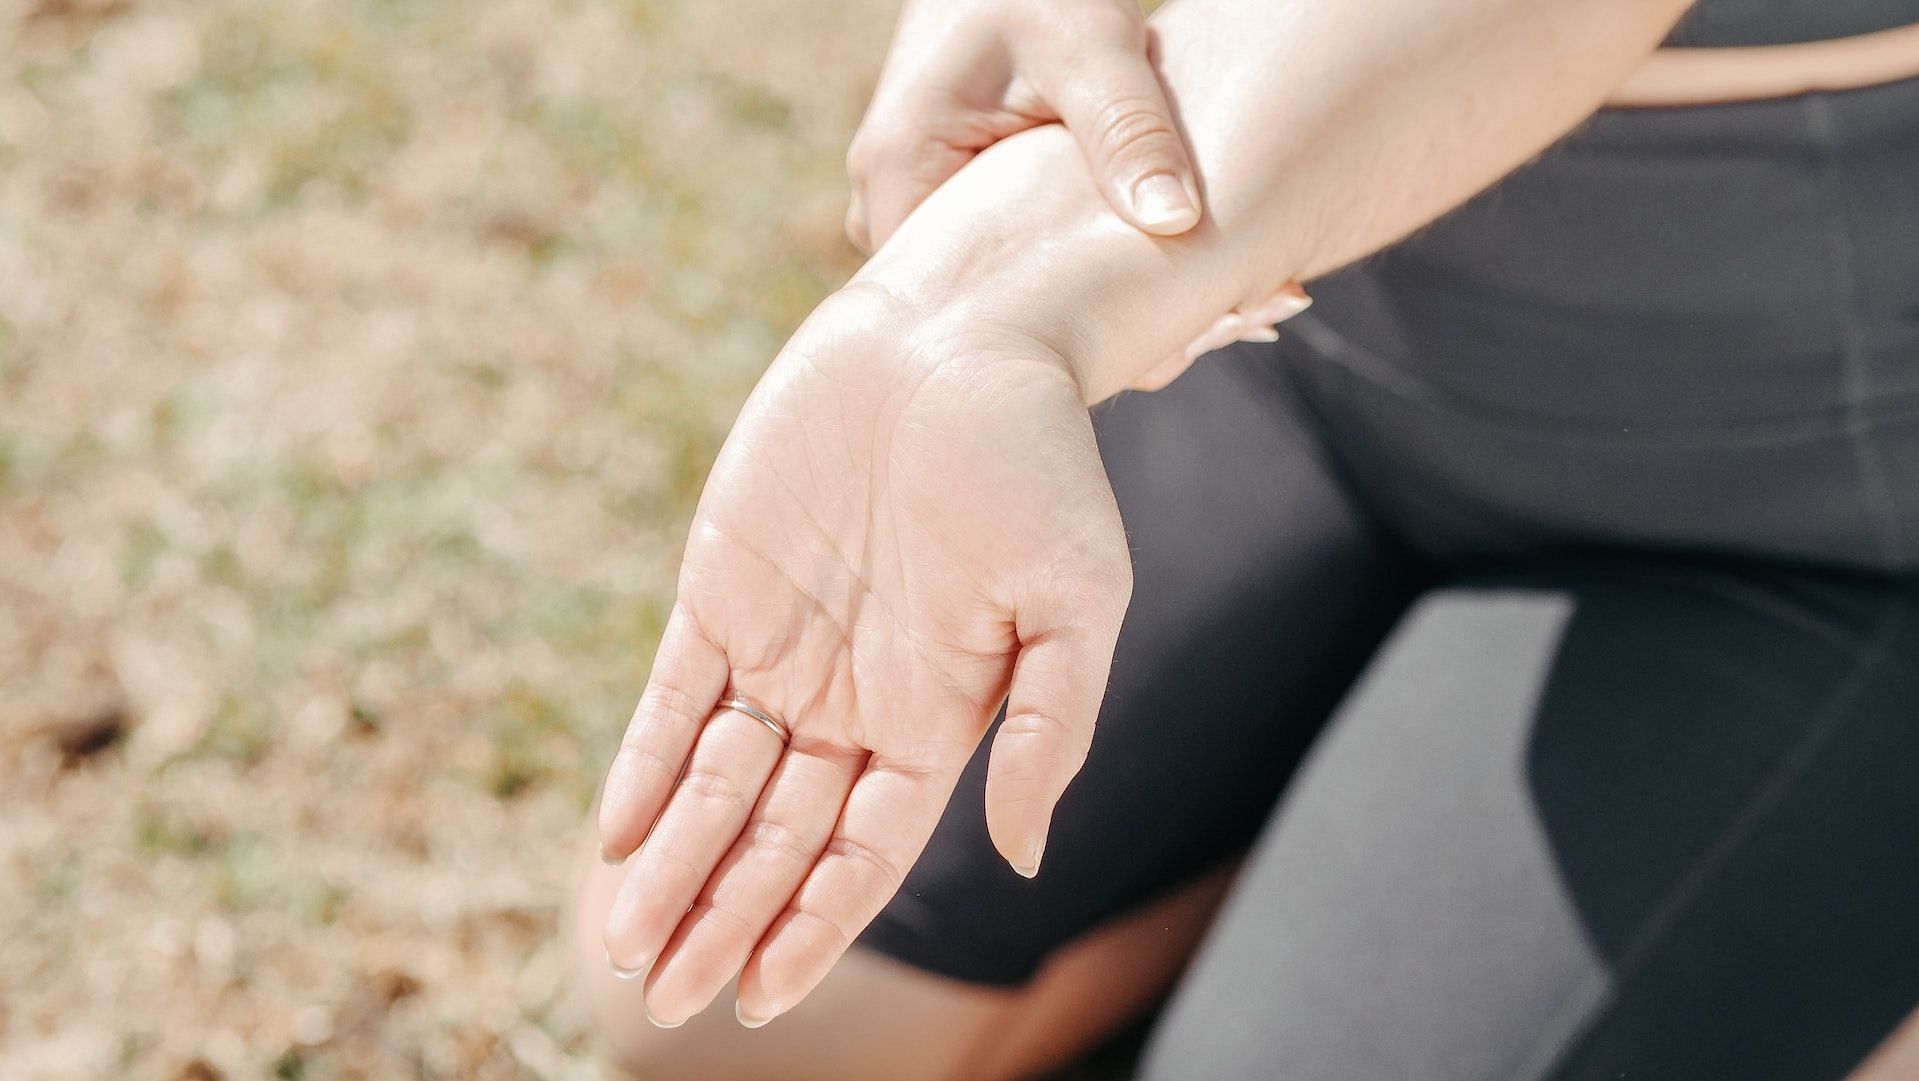 The eagle arm stretch is among the most effective wrist stretches. (Photo via Pexels/Kindel Media)